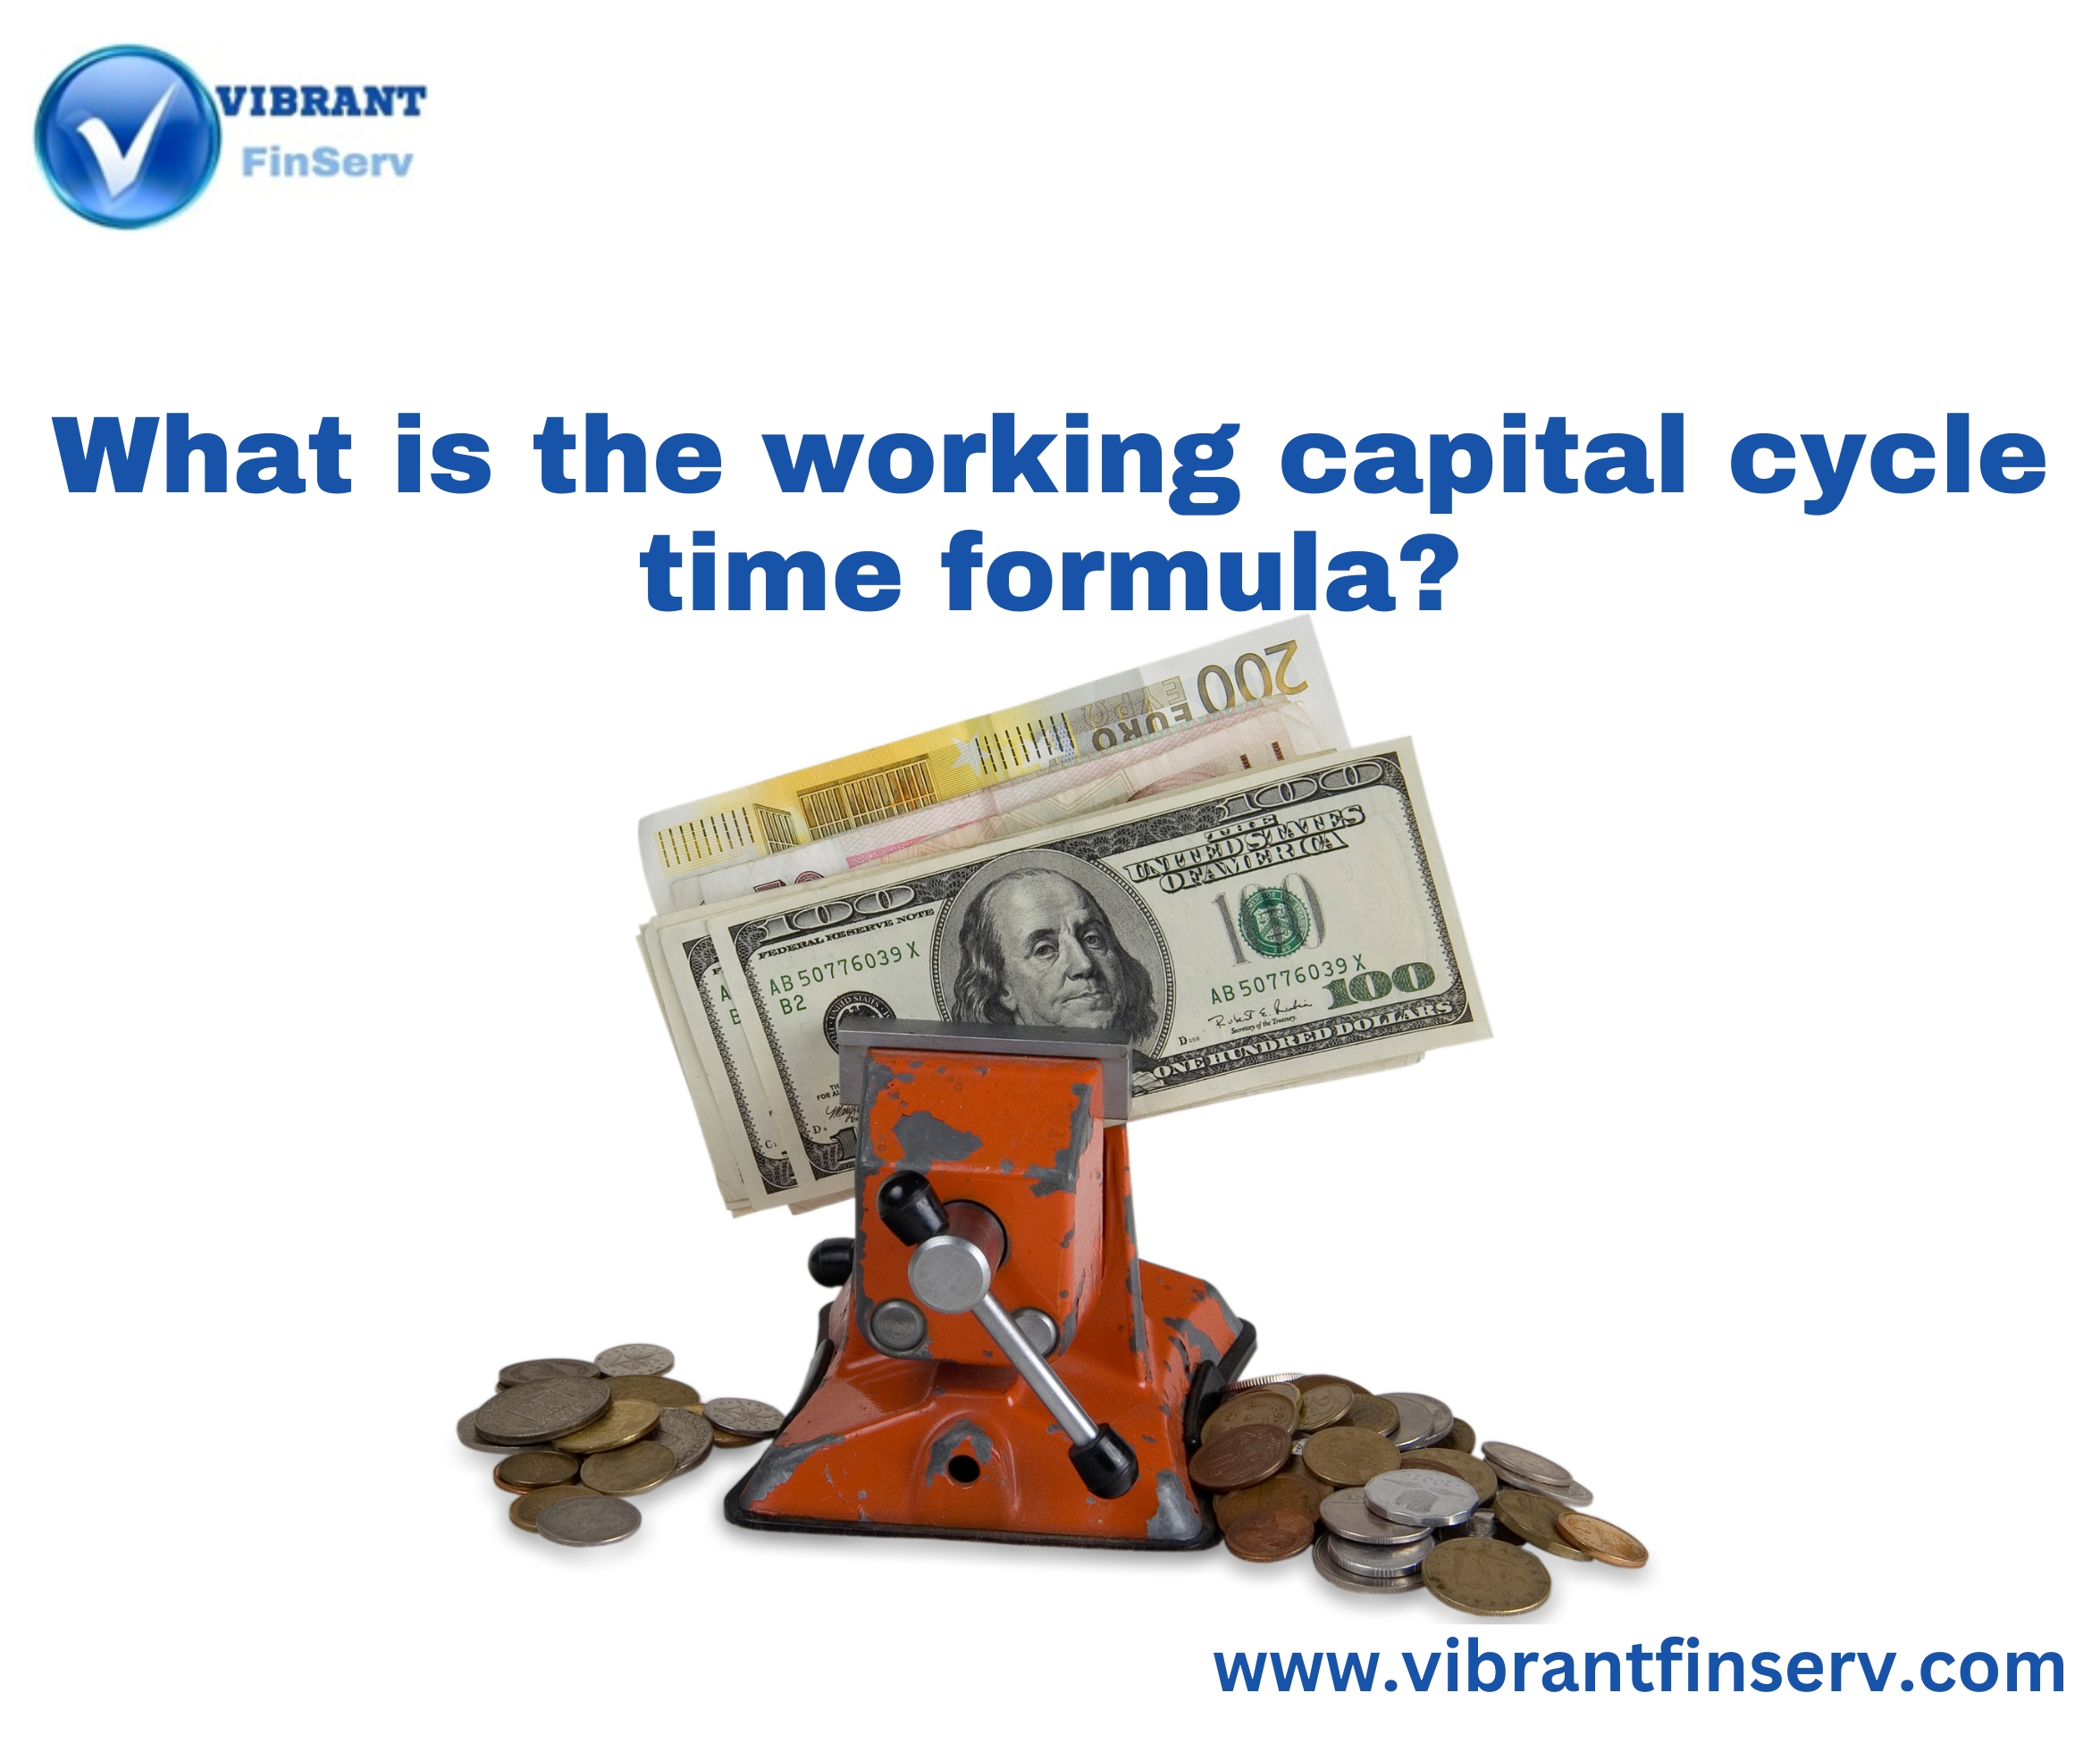 Working capital cycle time formula